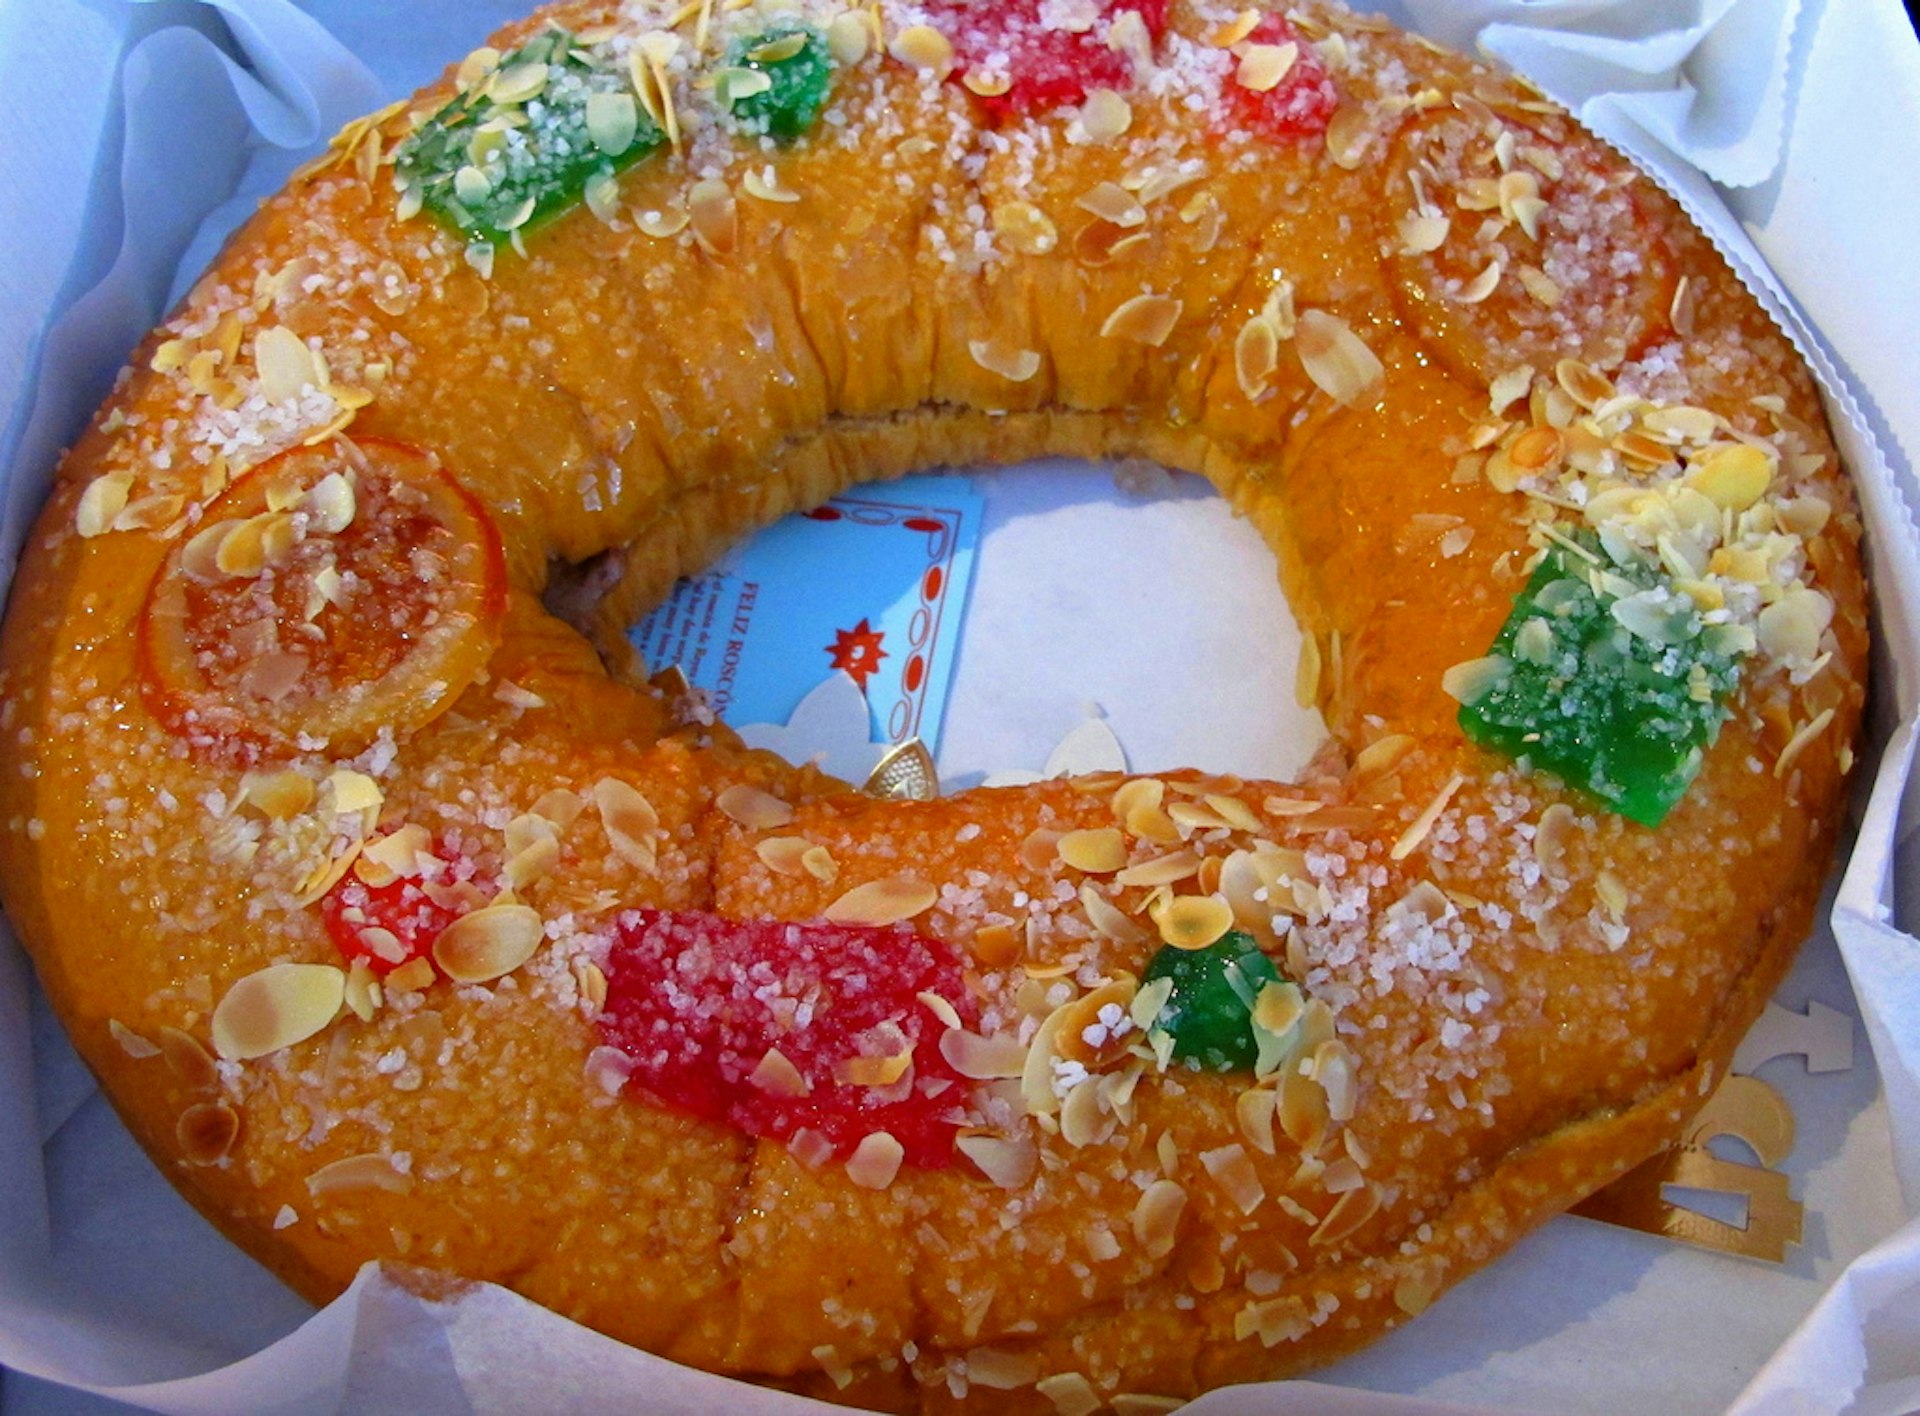 Roscón is traditionally eaten at New Year. Image by El Colleccionista de instant / CC BY-SA 2.0